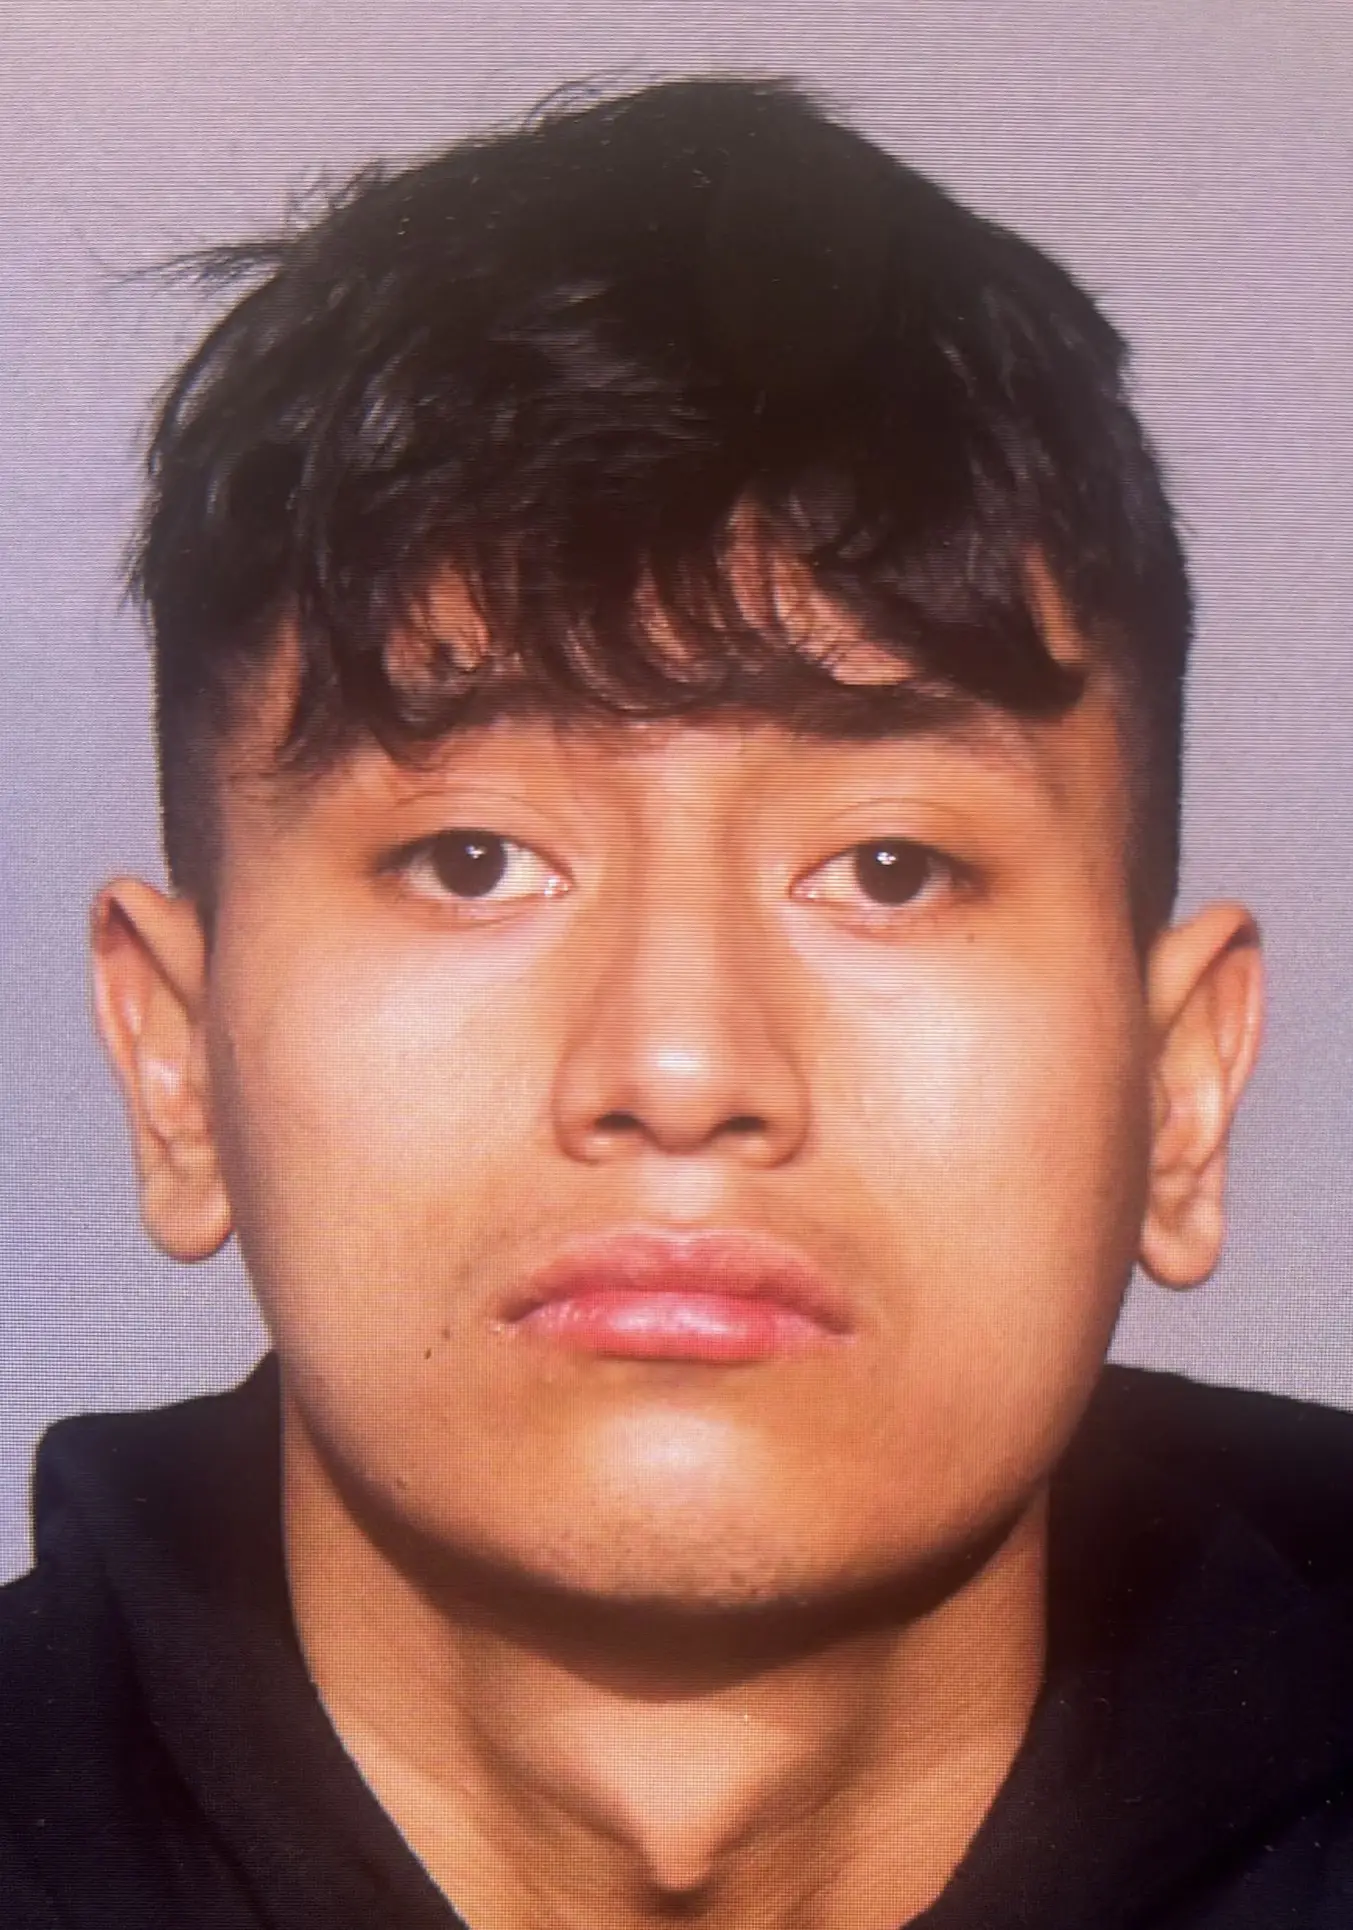 A 22-year-old migrant from Ecuador was arrested after taking a historic fireboat on an unauthorized journey down the Hudson River, per the NY Post.